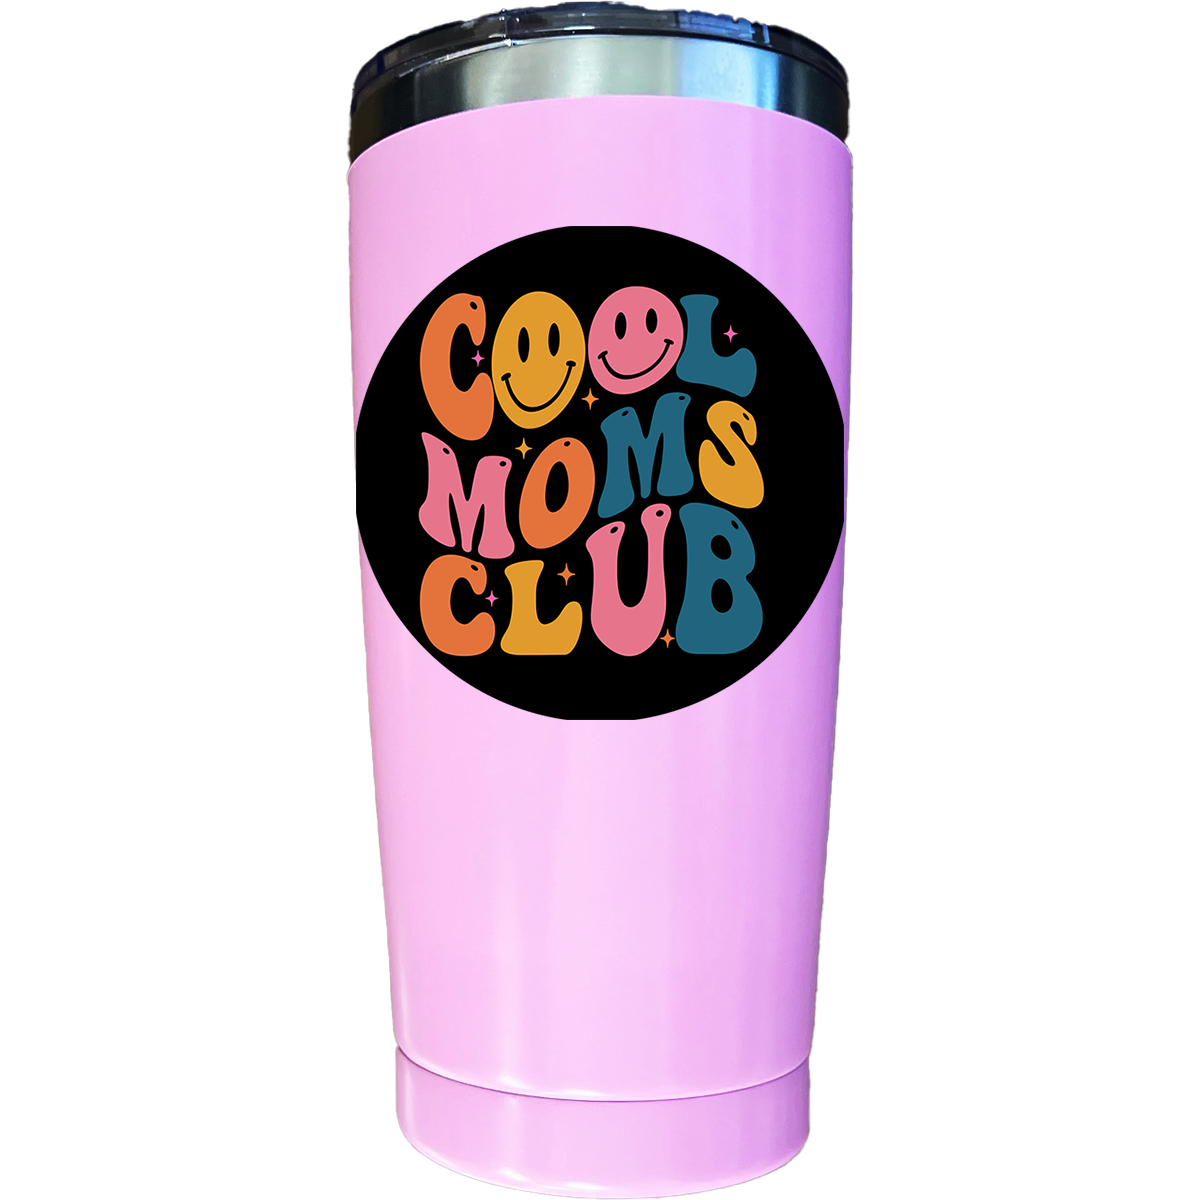 COOL MOM&#39;S CLUB STAINLESS STEEL DOUBLE VACUUM TRVEL CUP